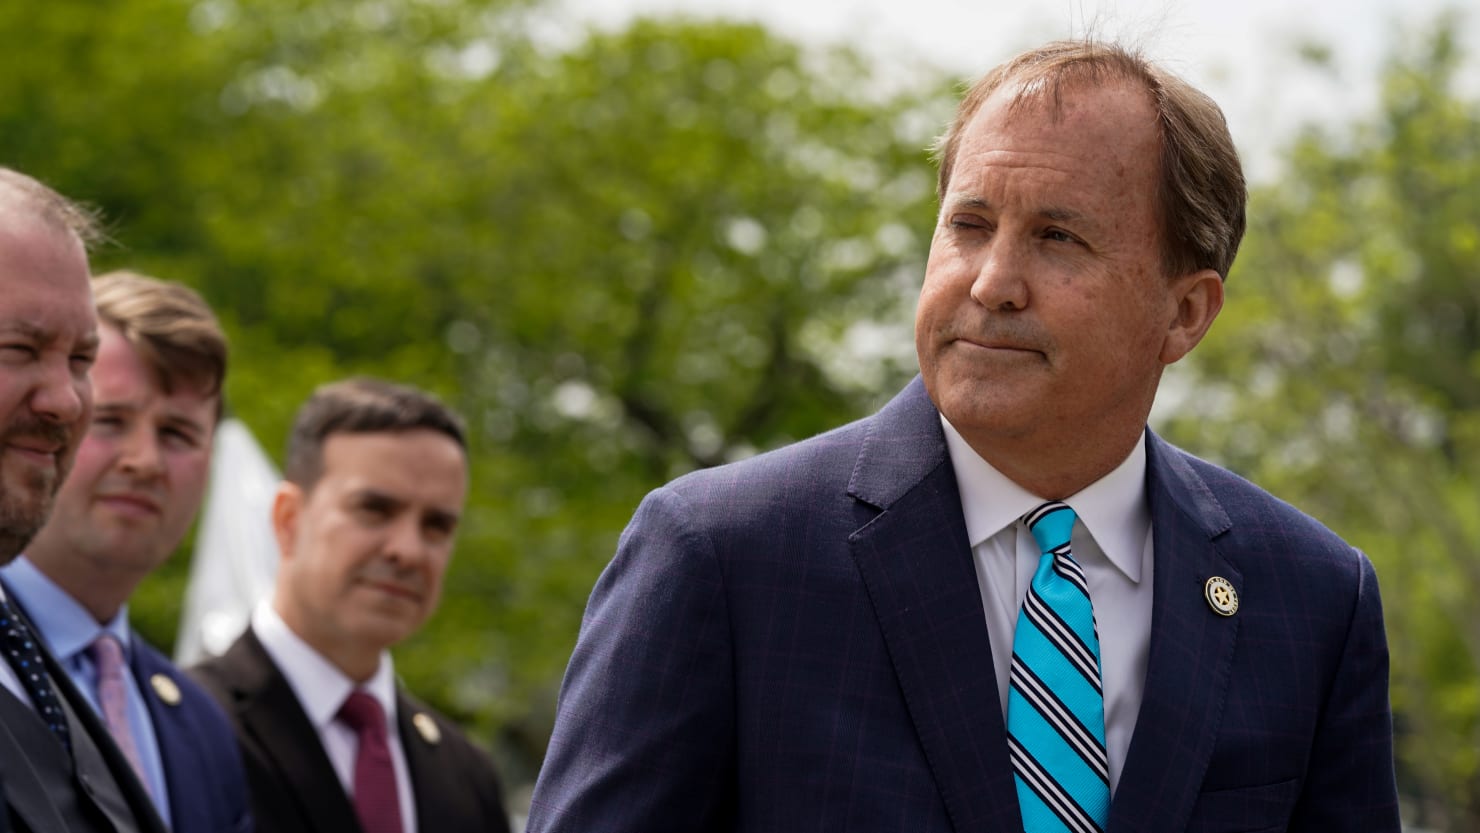 AG Ken Paxton should be impeached, Texas House committee says